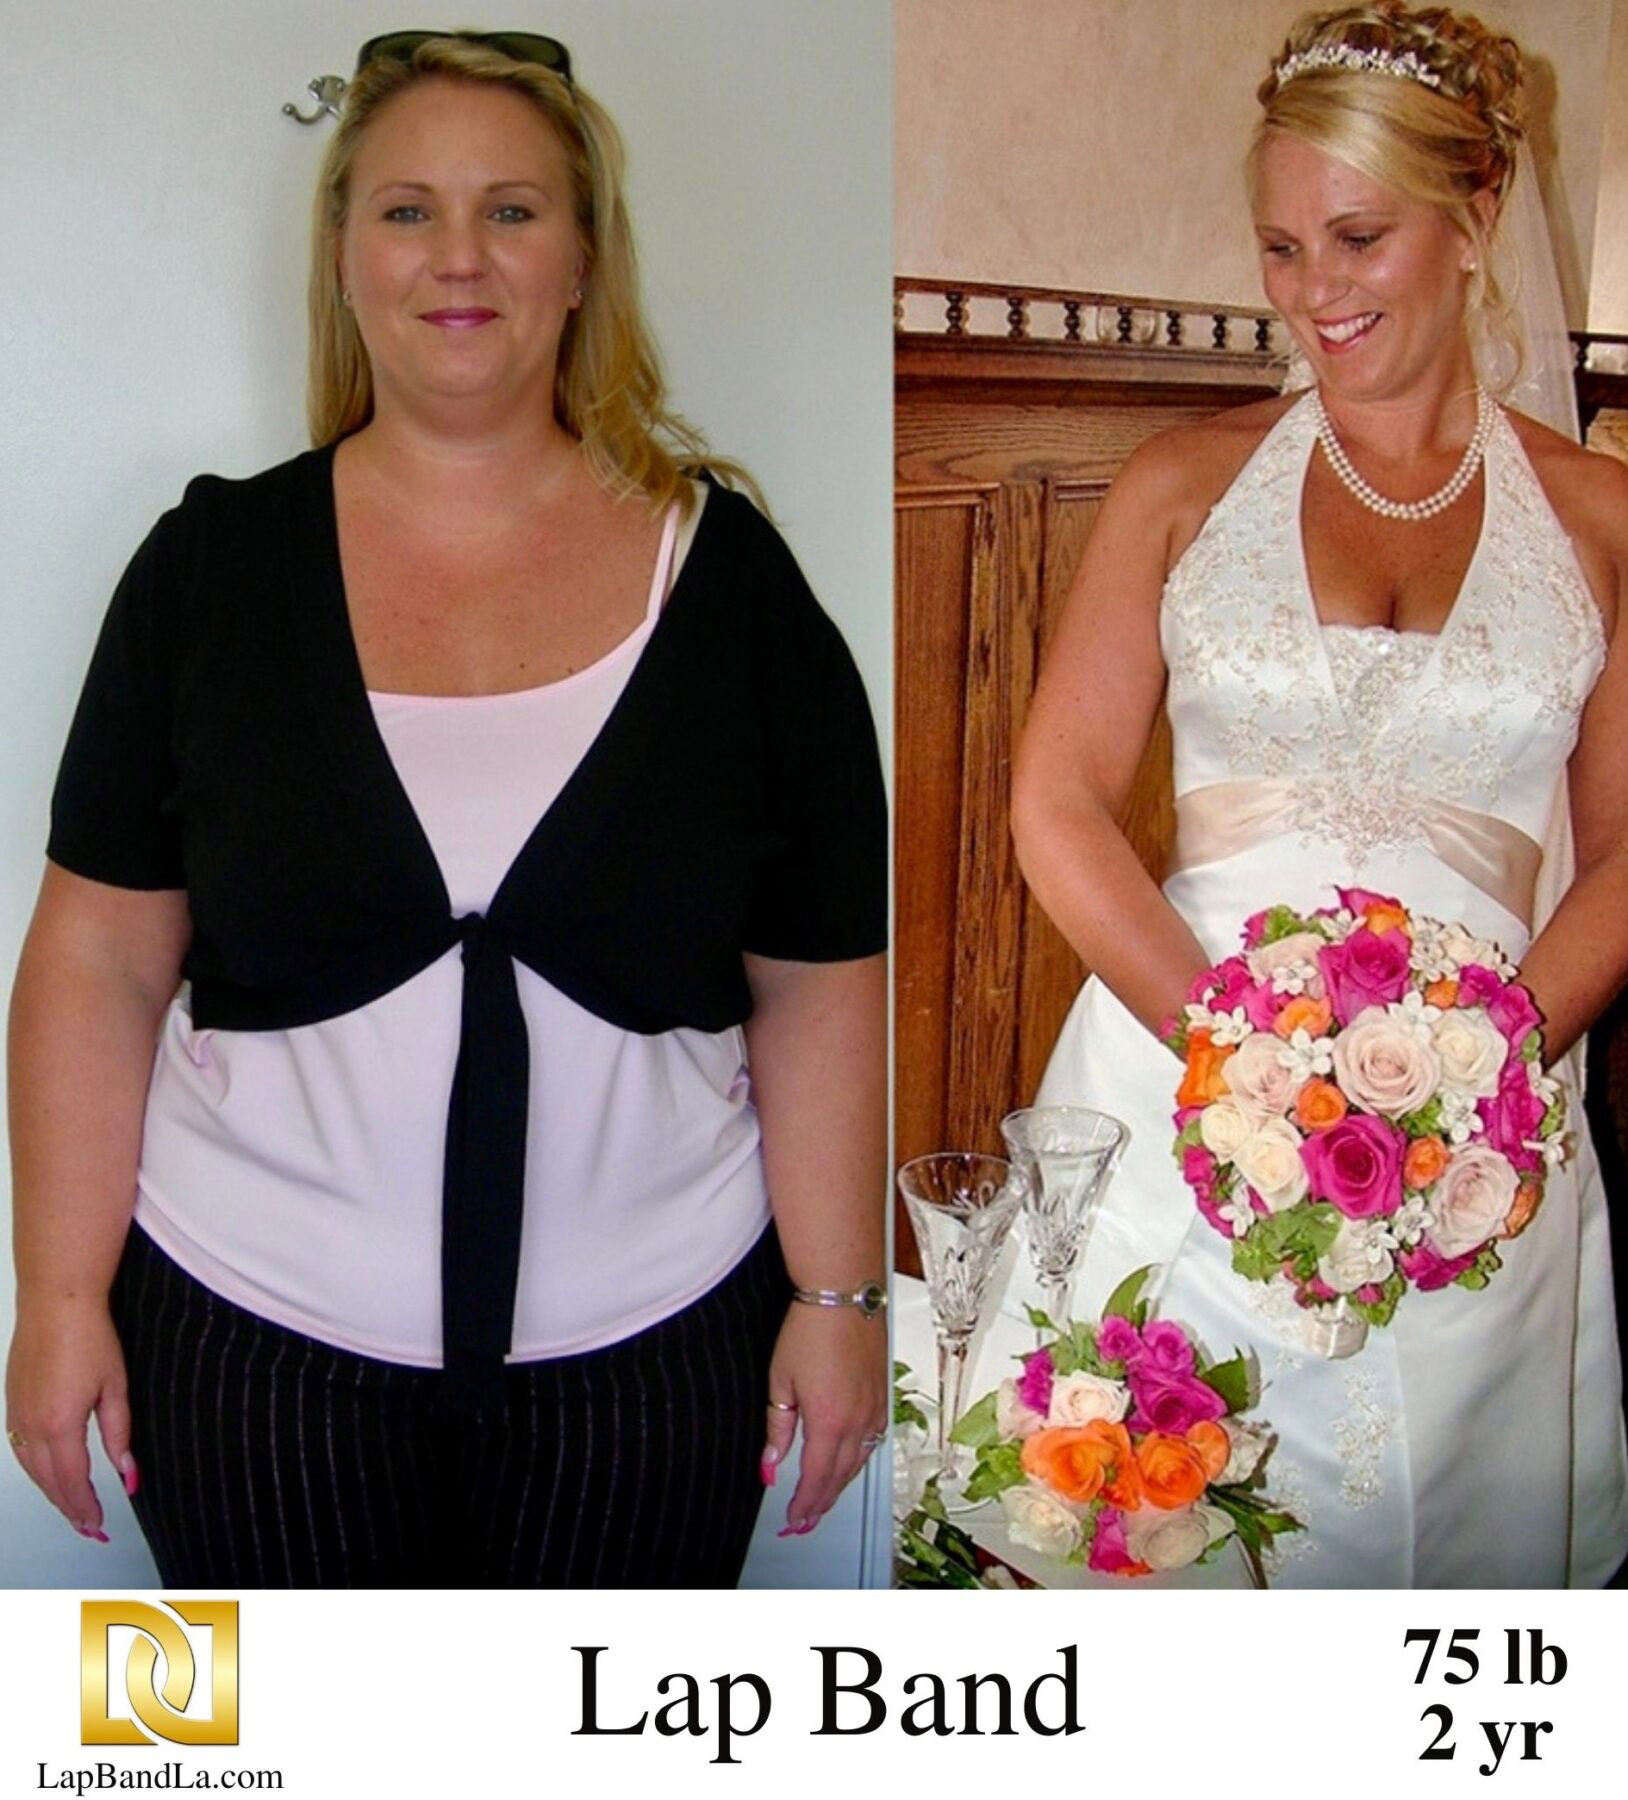 Stacy 2 years after lap band weight loss surgery.